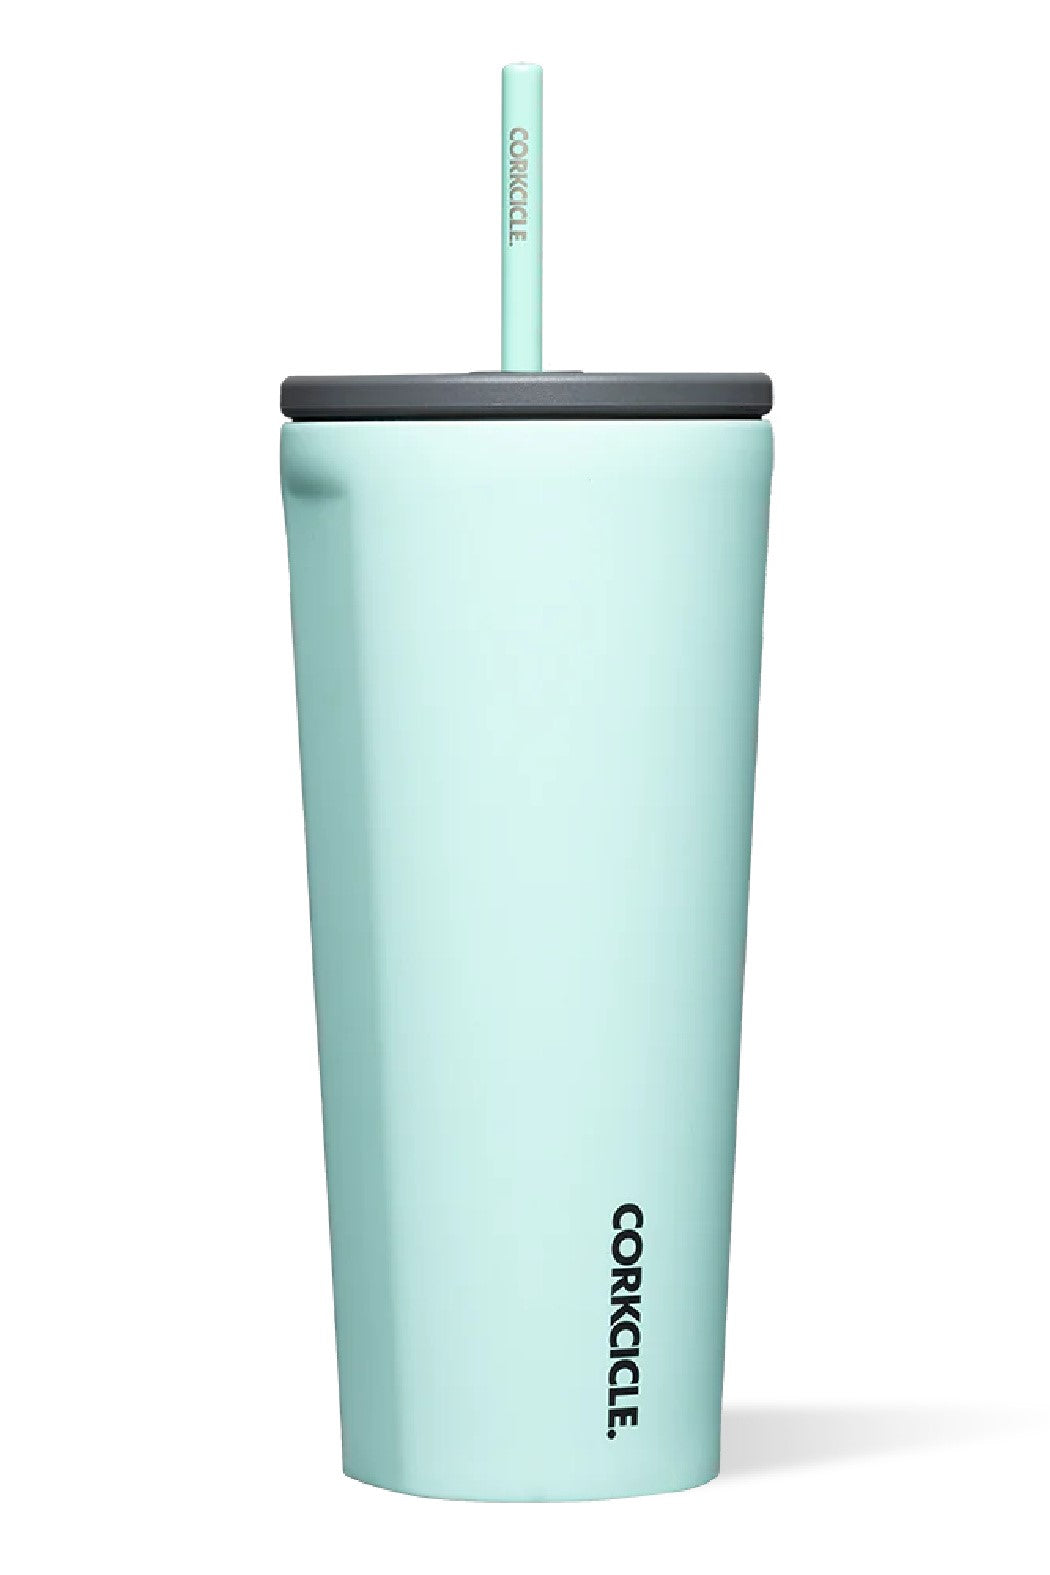 24oz cold cup by corkcicle. Teal colour with straw. Insulated. Summer23. Jolie folie boutique